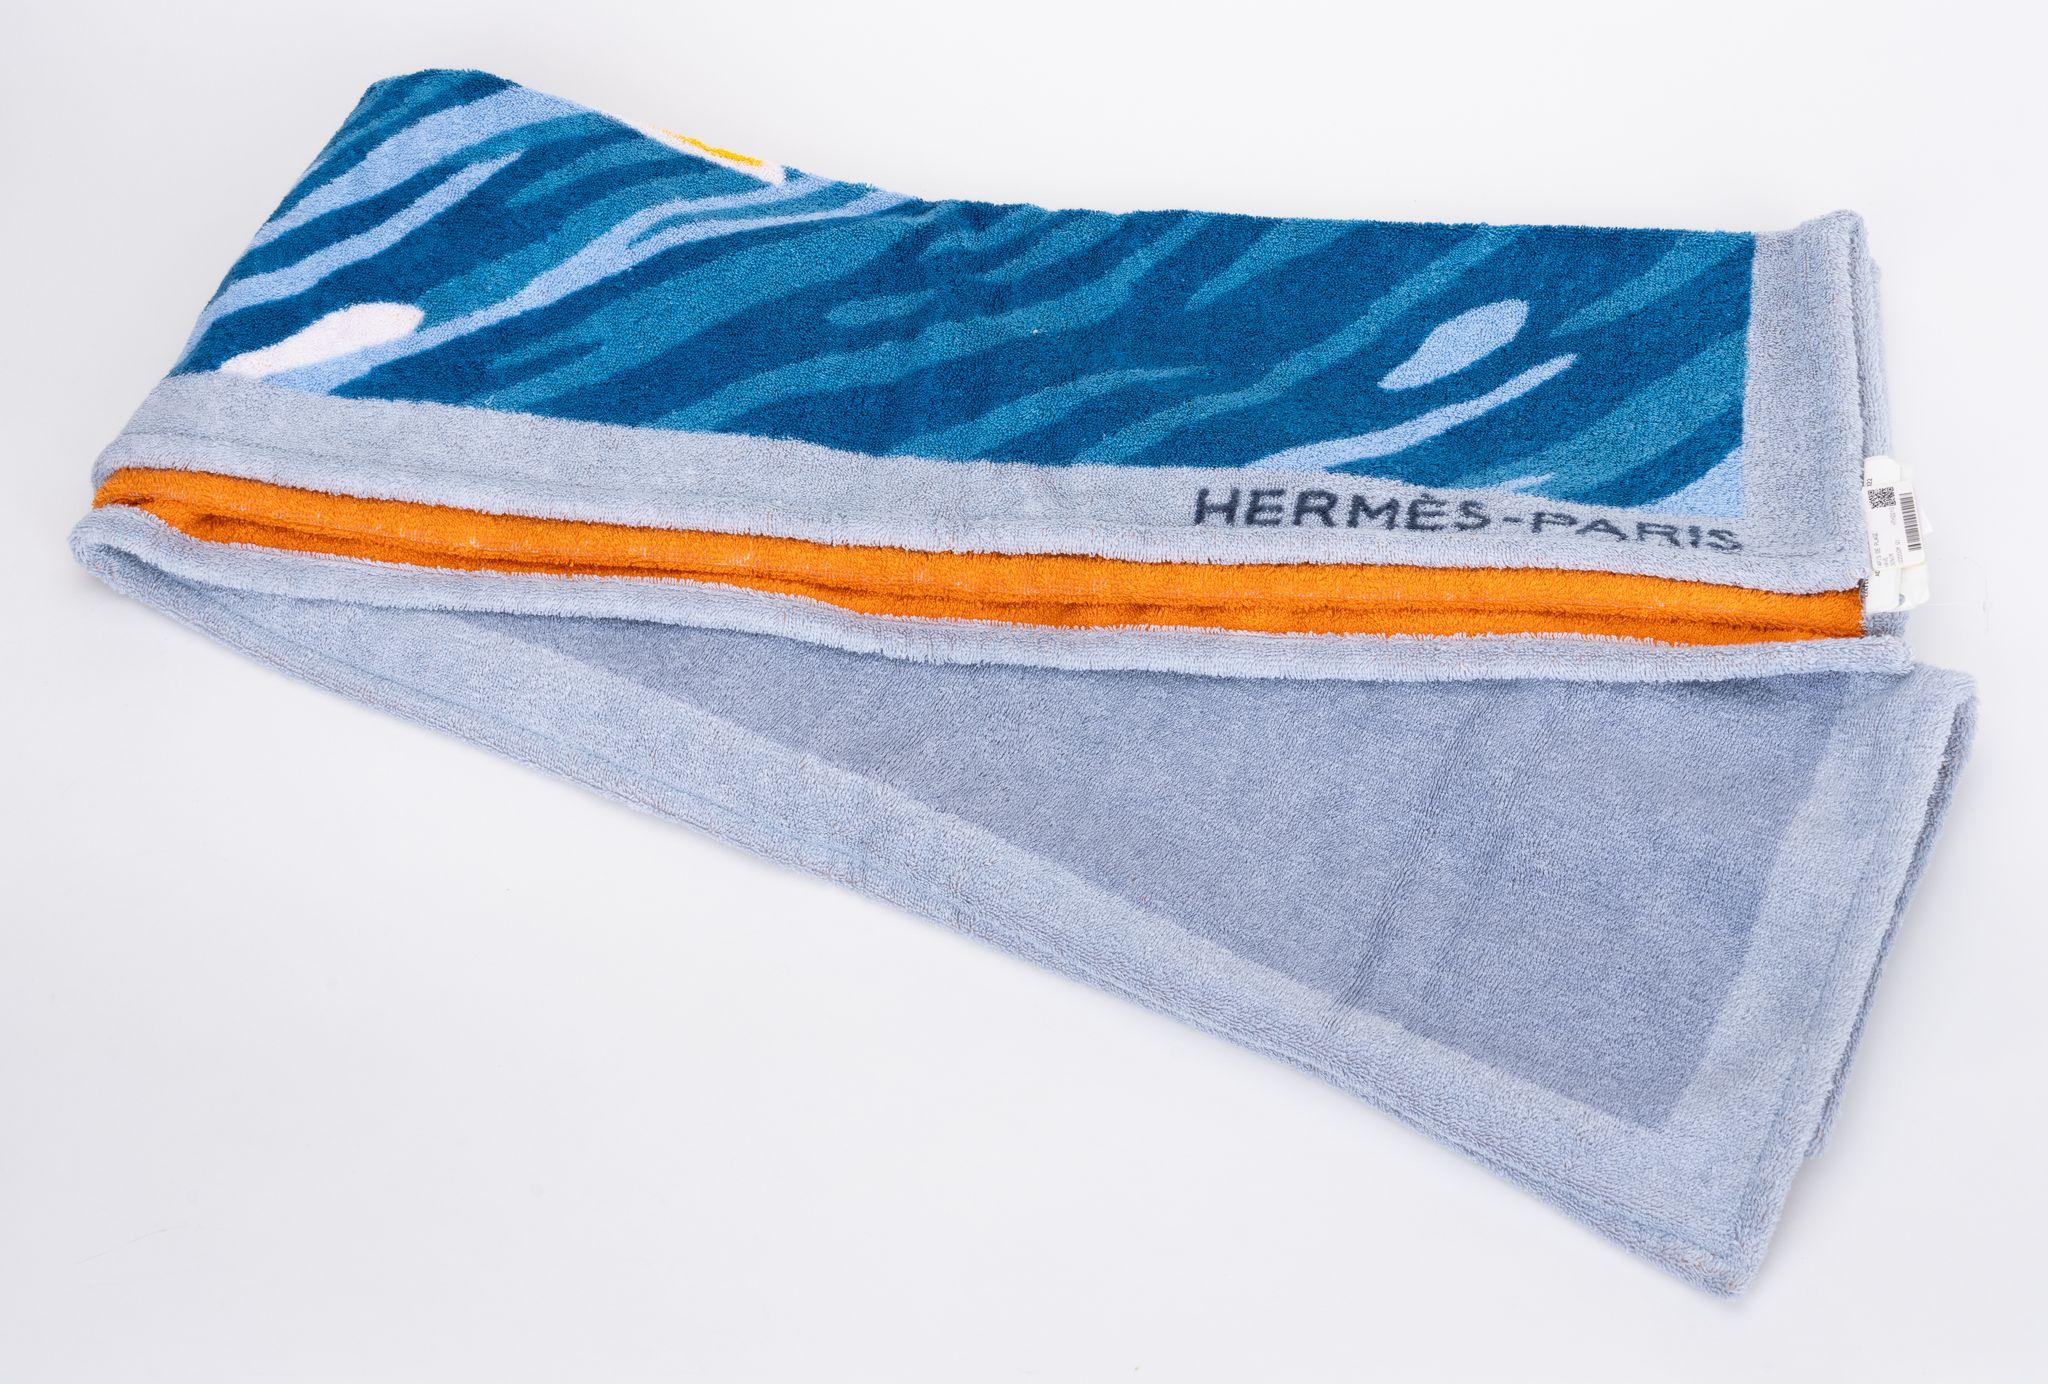 Hermès BNIB Surf & Wave Beach Towel In New Condition For Sale In West Hollywood, CA